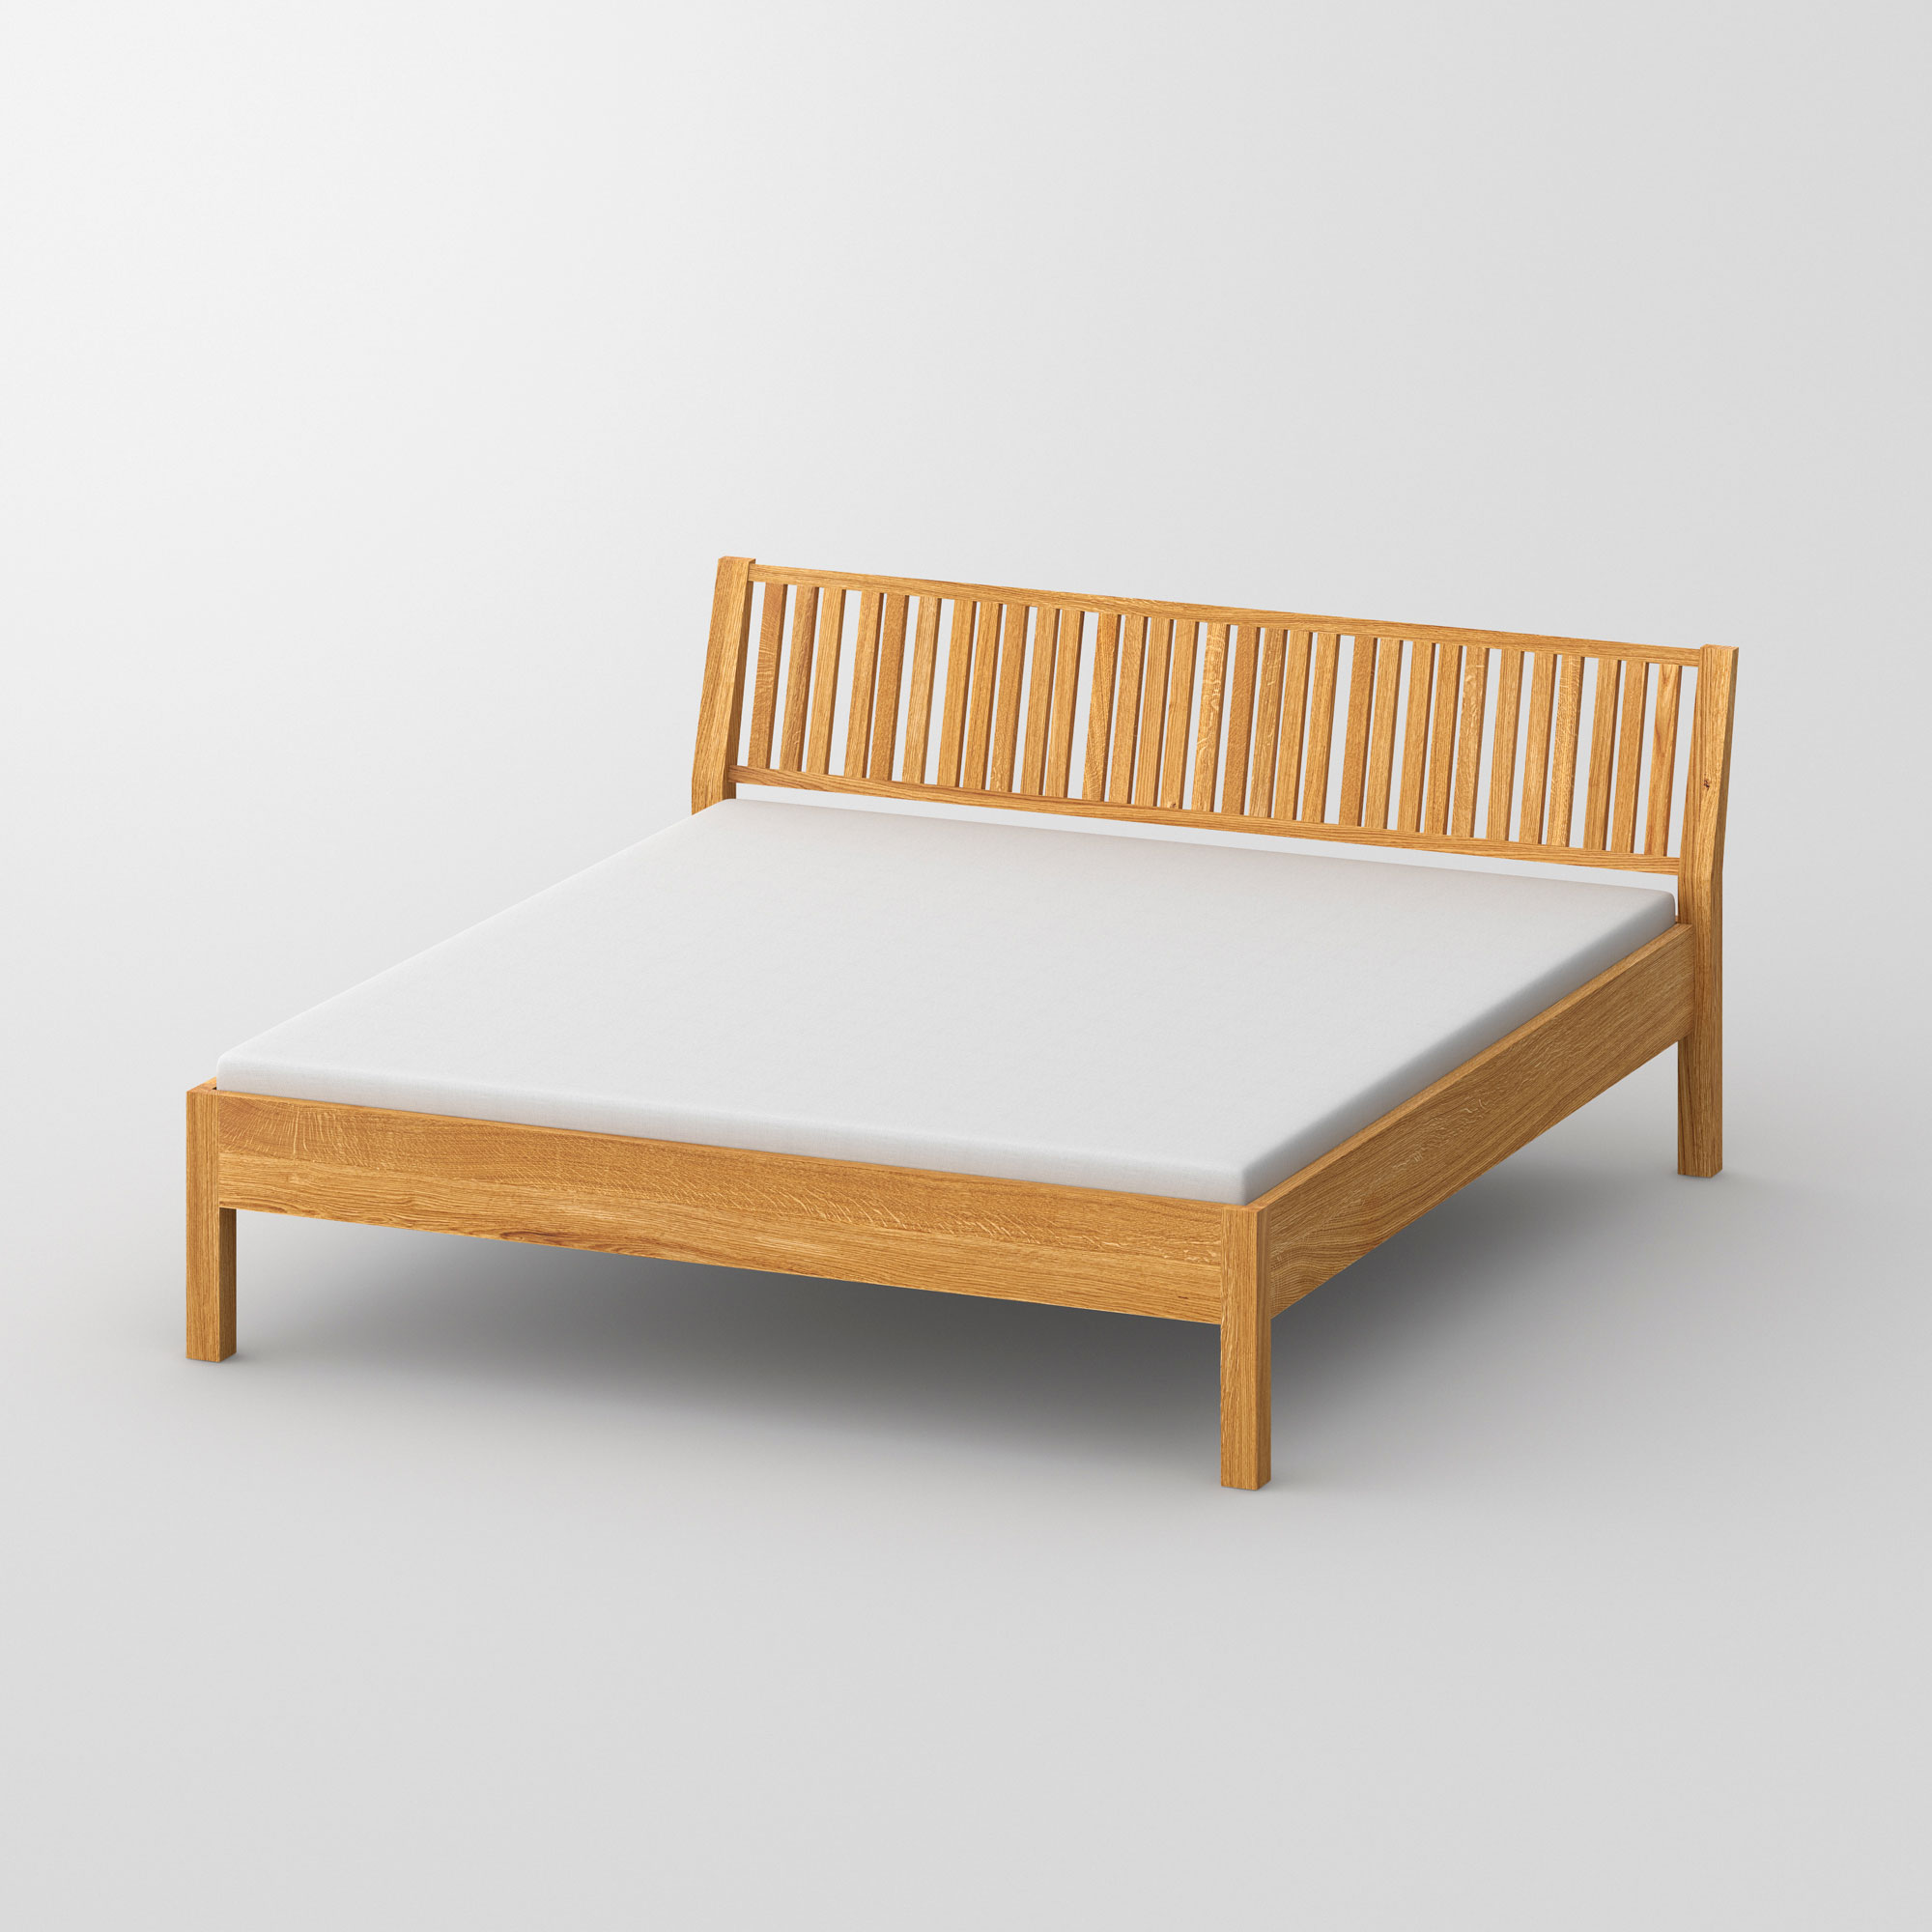 Wooden Bed VILLA cam1 custom made in solid wood by vitamin design